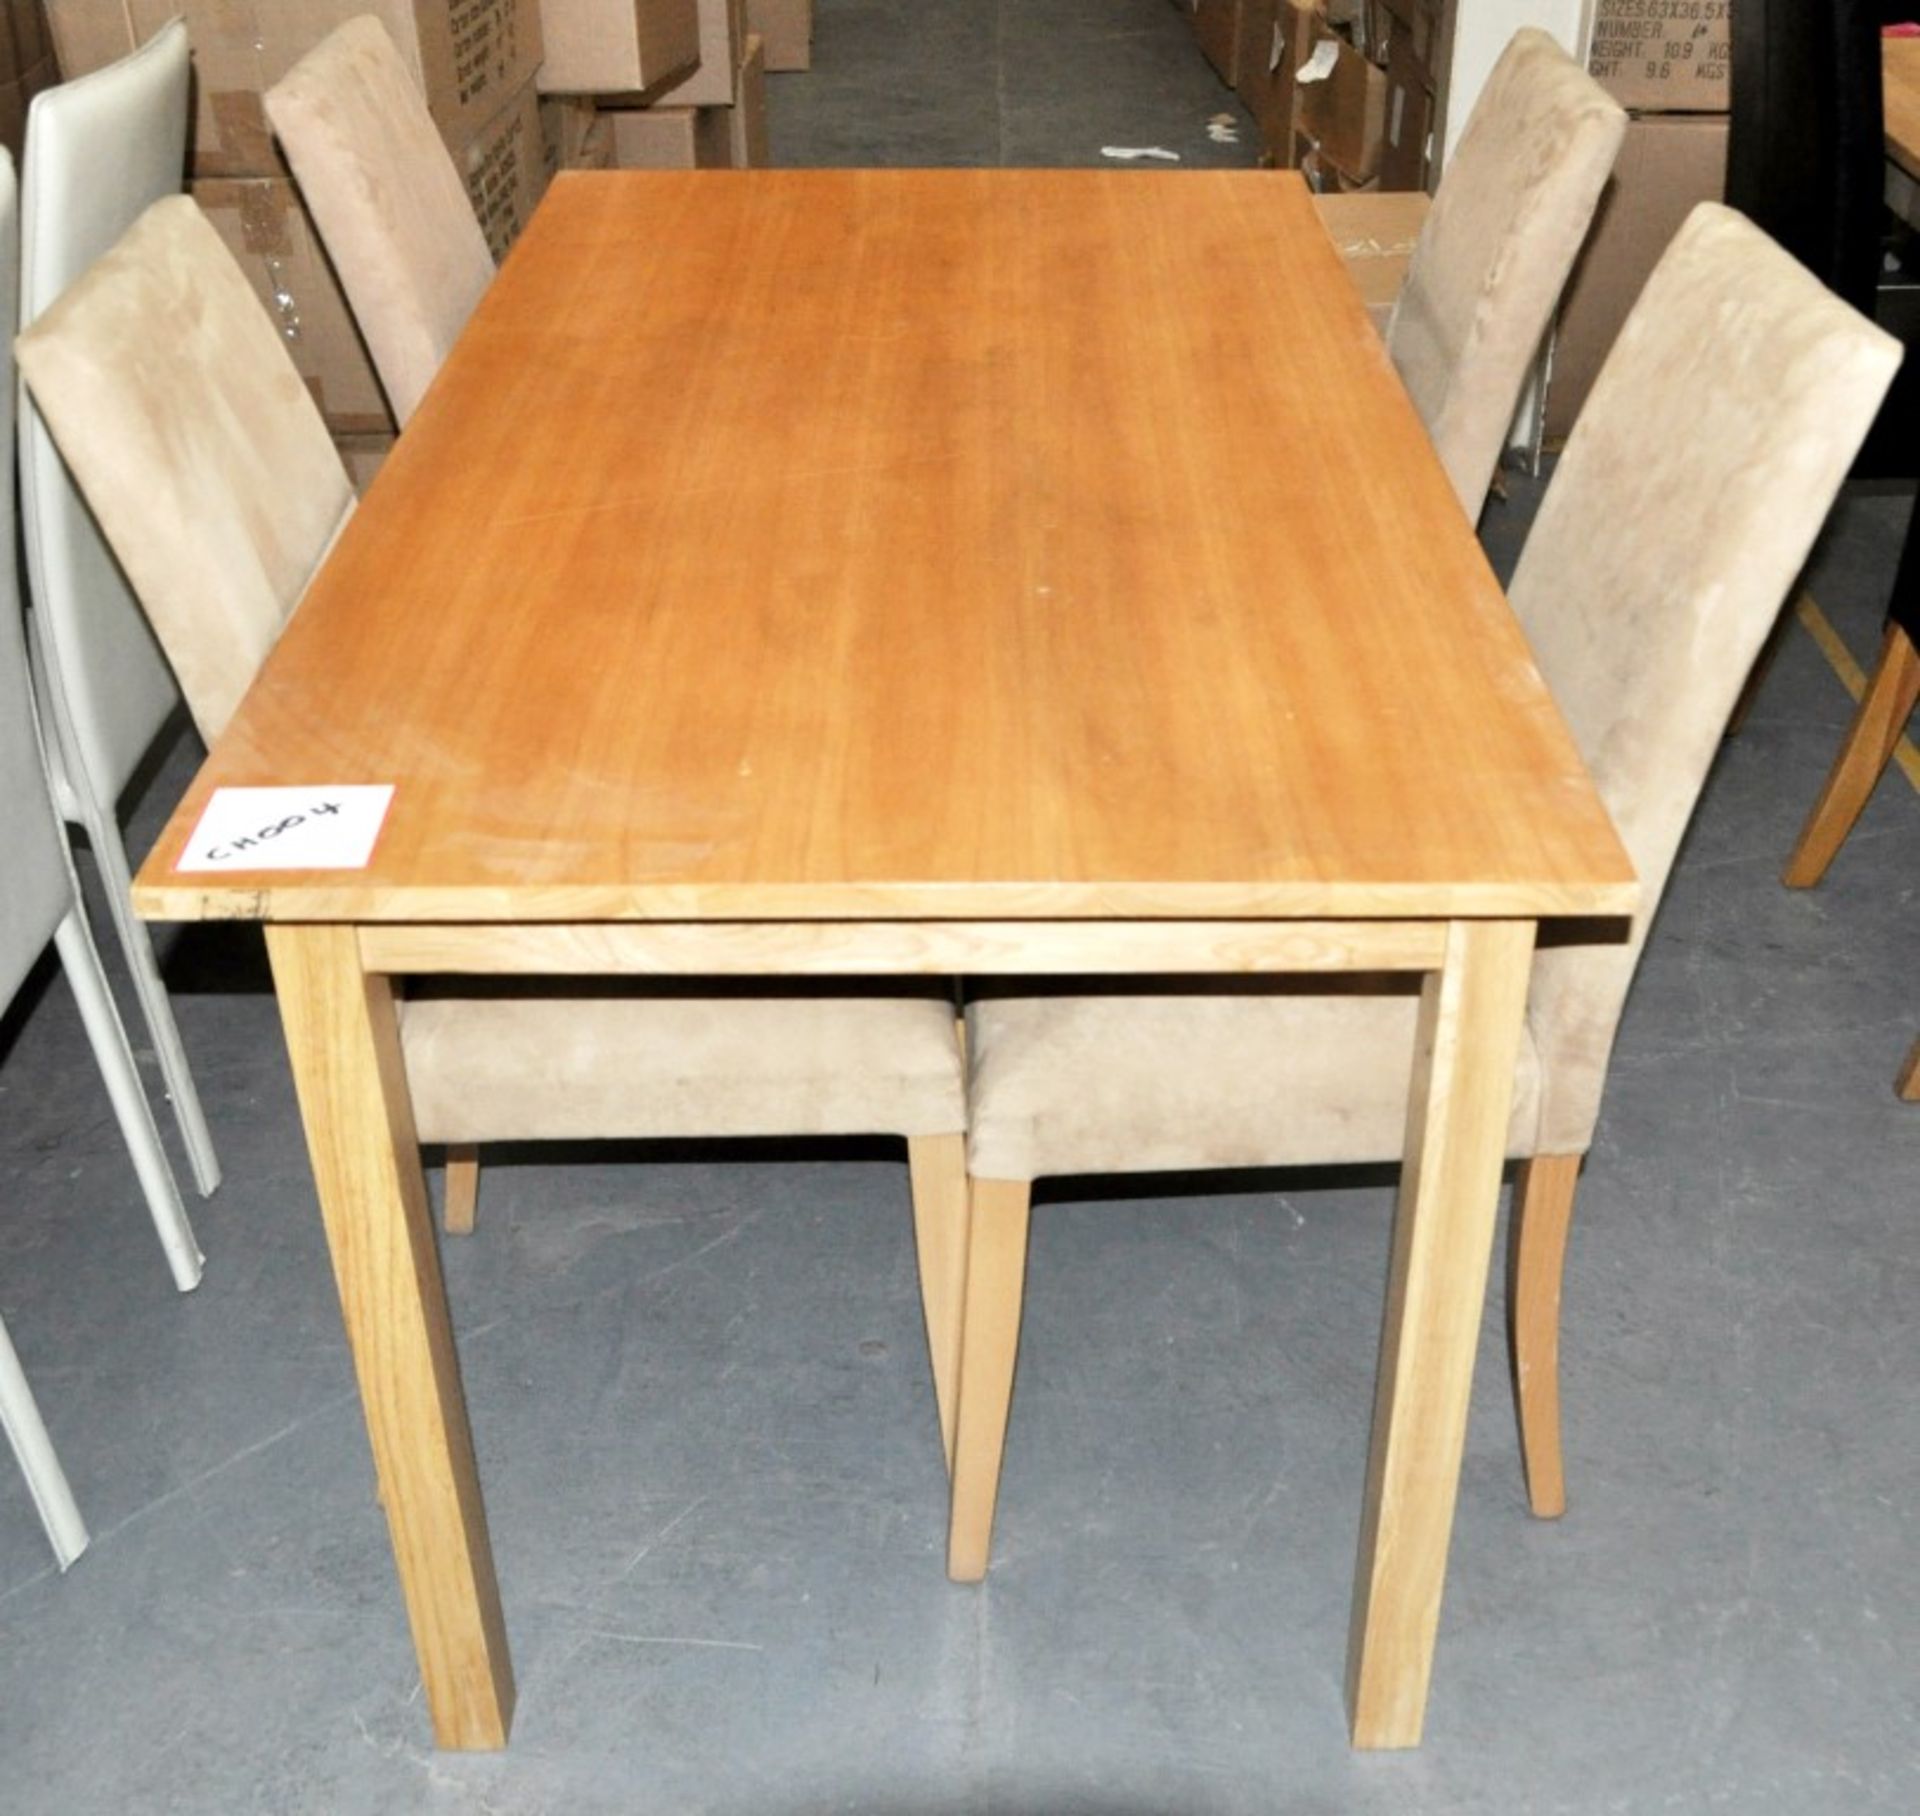 1 x Beech 5ft Table With 4 x Chairs Covered In Fawn Coloured Suede - Ref CH004 – Chairs Feature